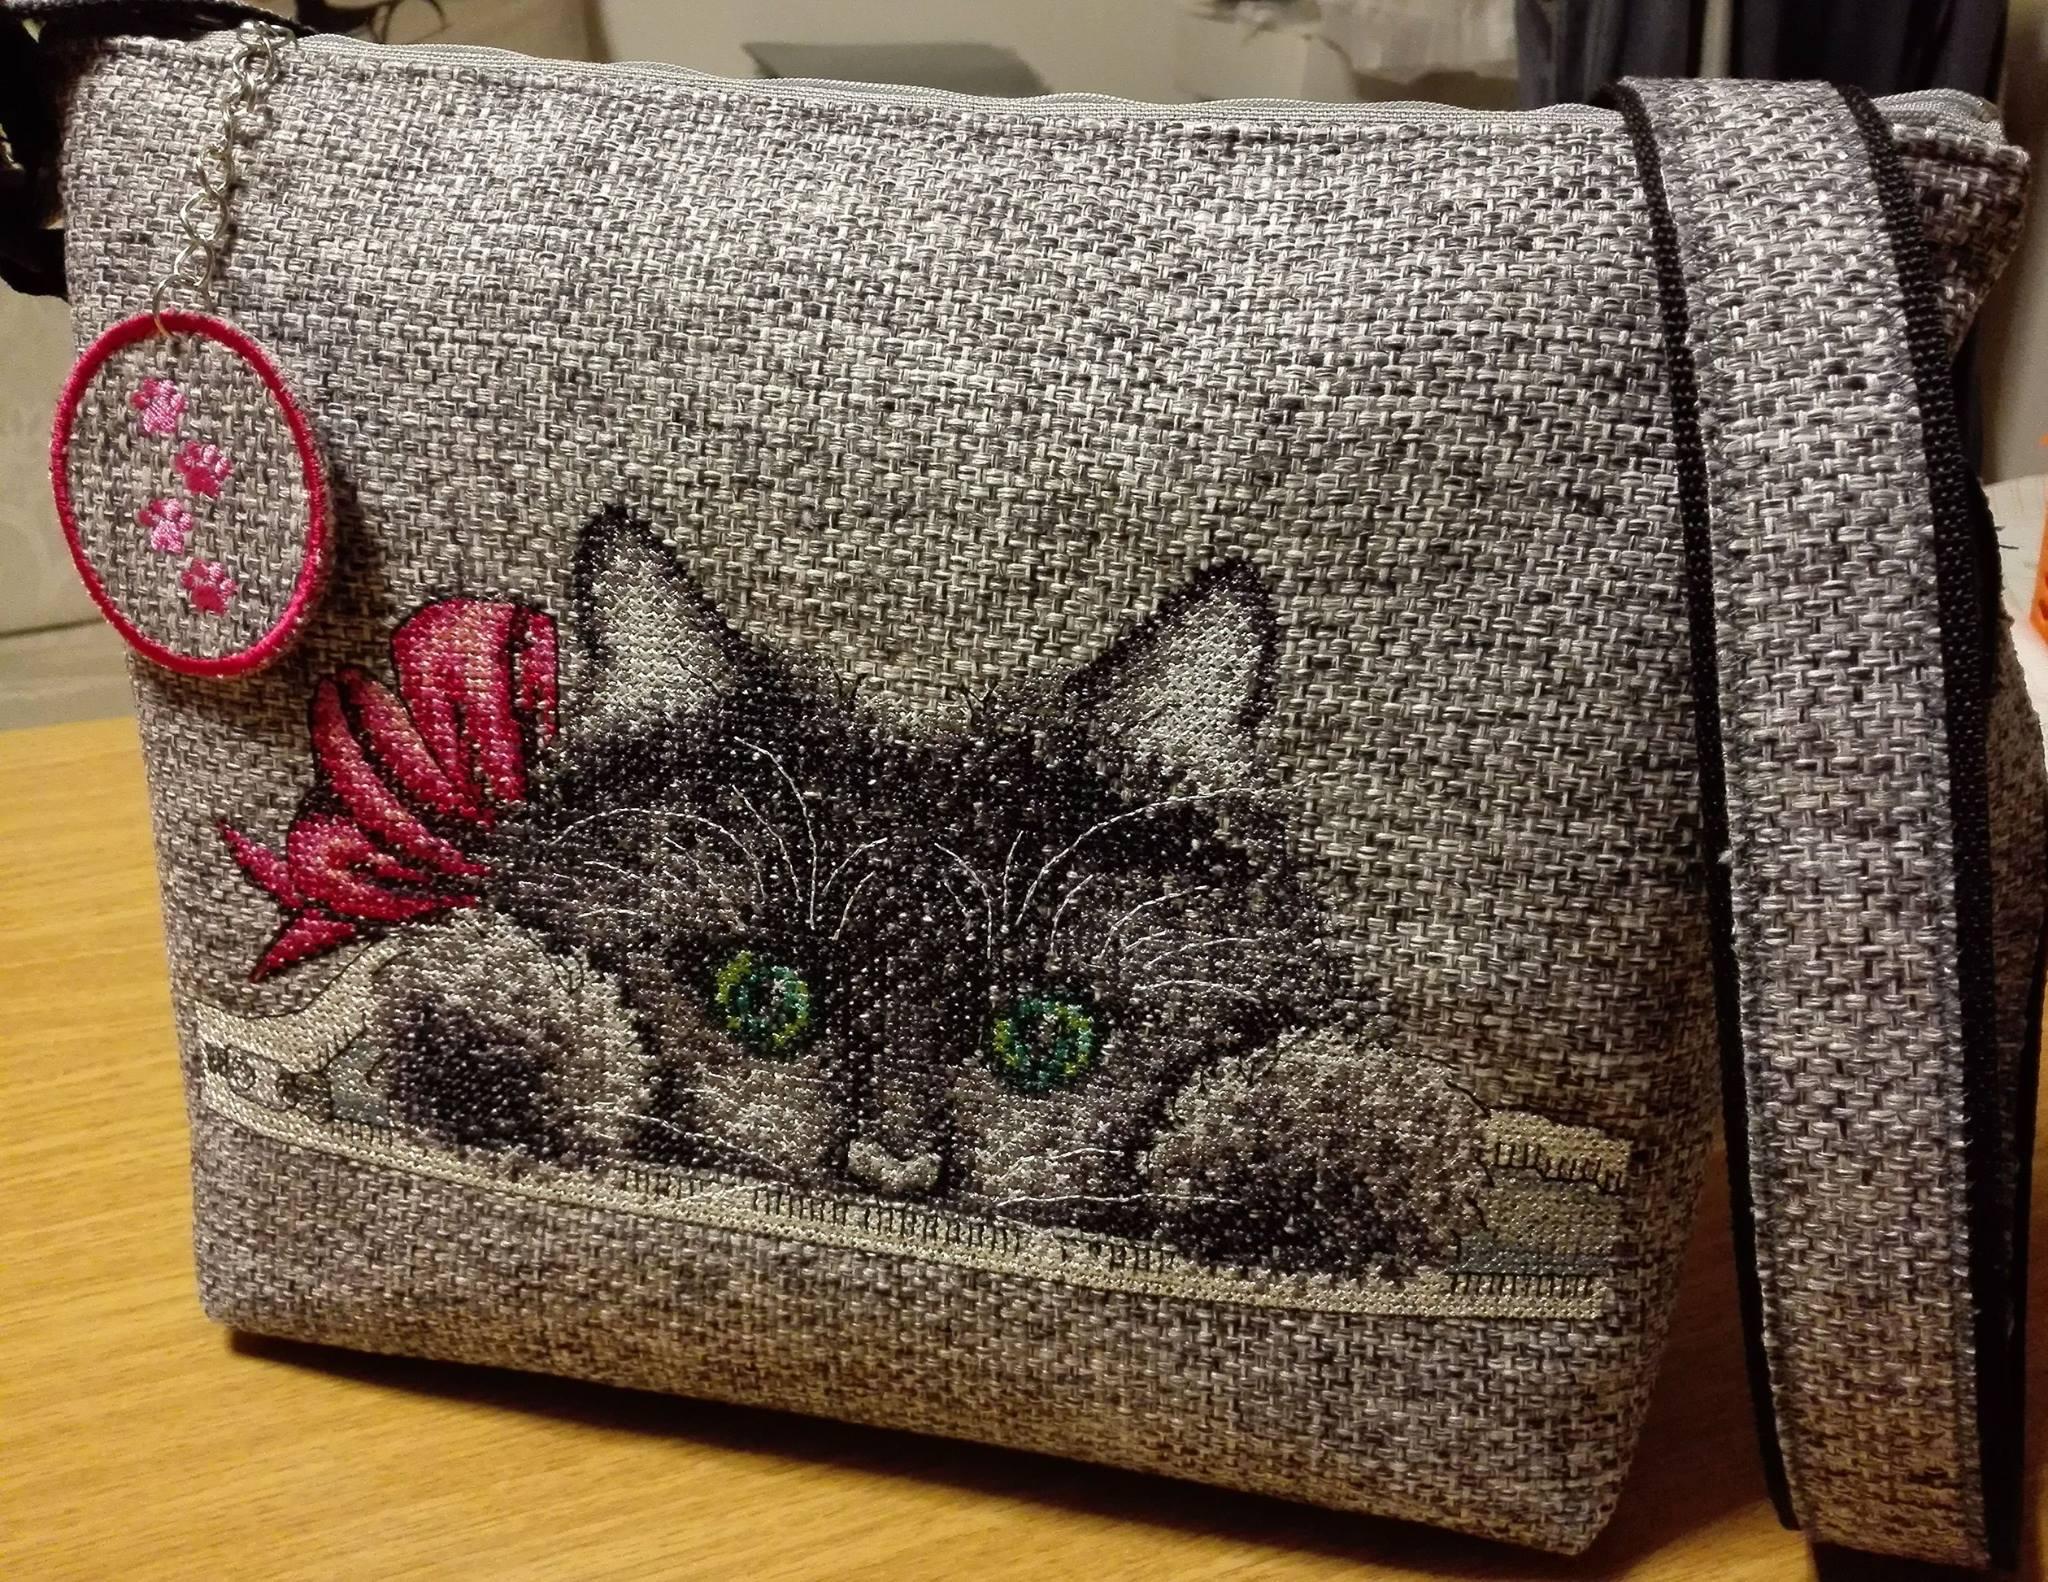 Bag with cat cross stitch free embroidery design